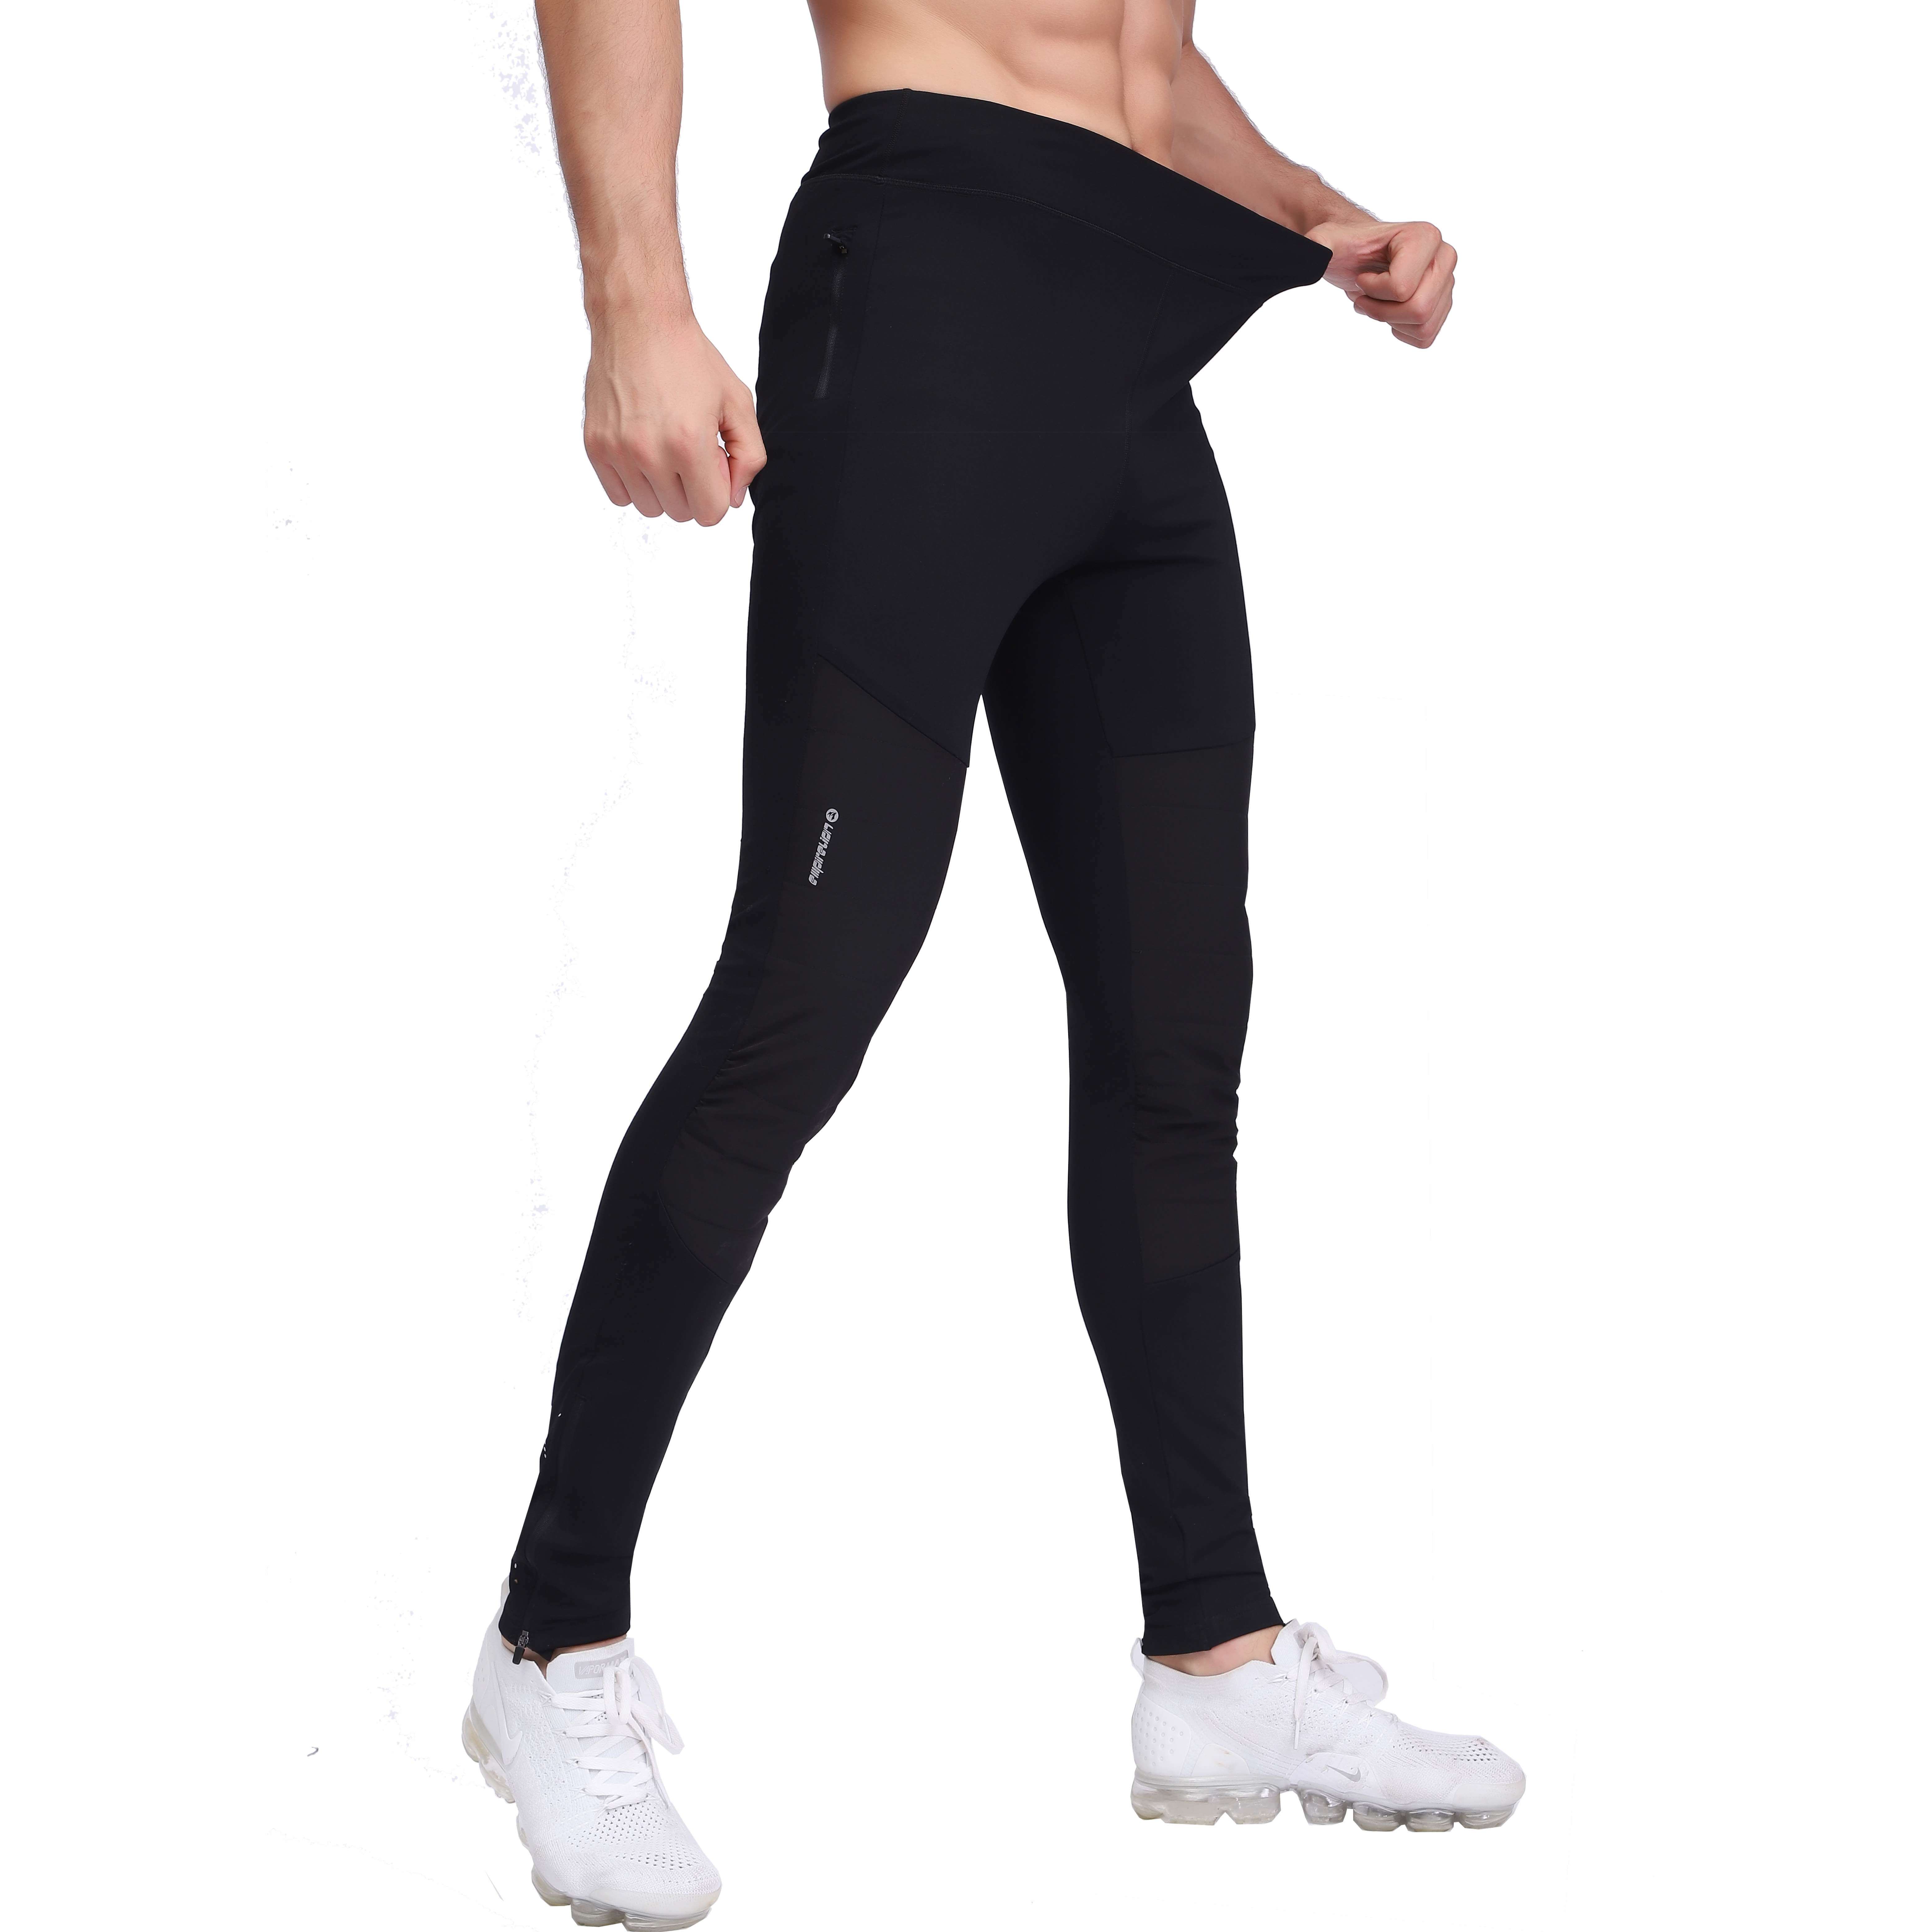 Men's High Waist Thermal Knee Padded Tight Leggings With Crotch Gusset